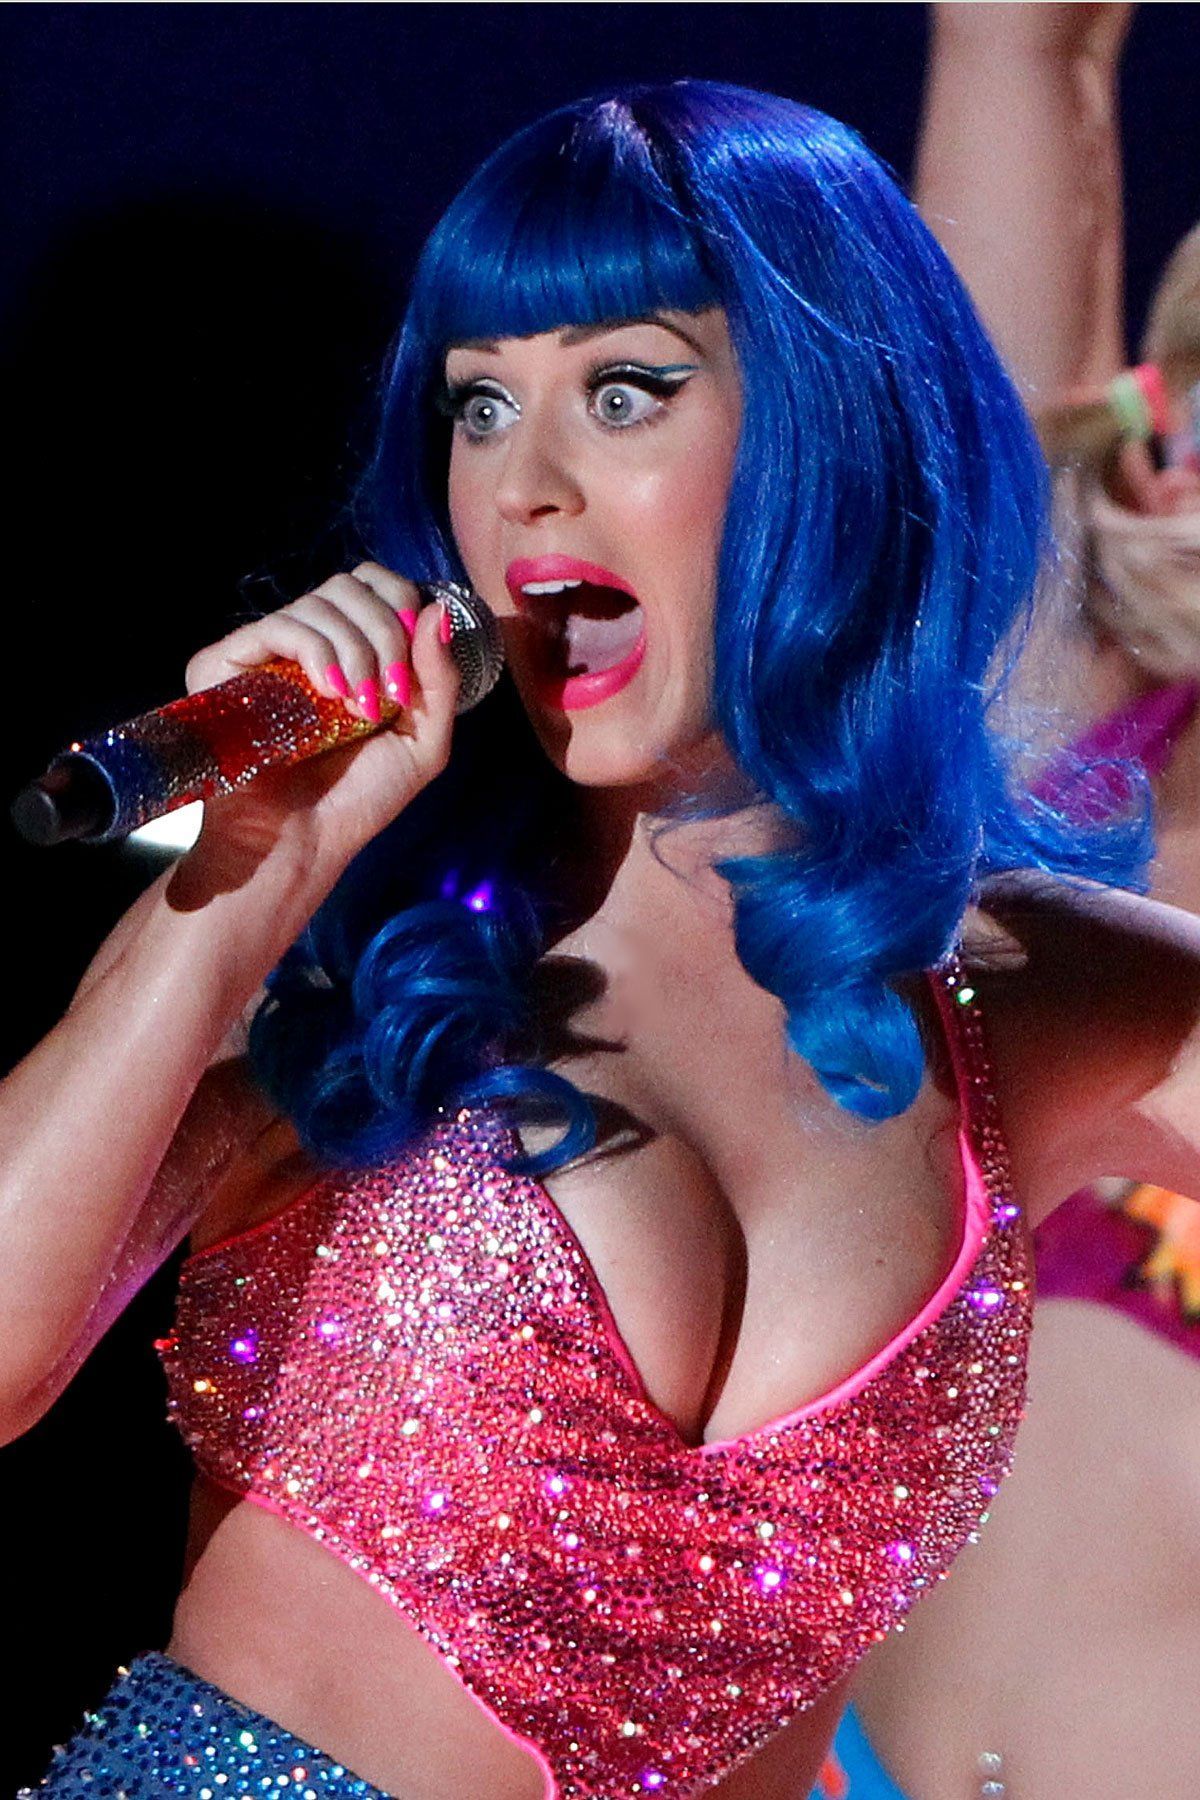 Katy perry shows boobs